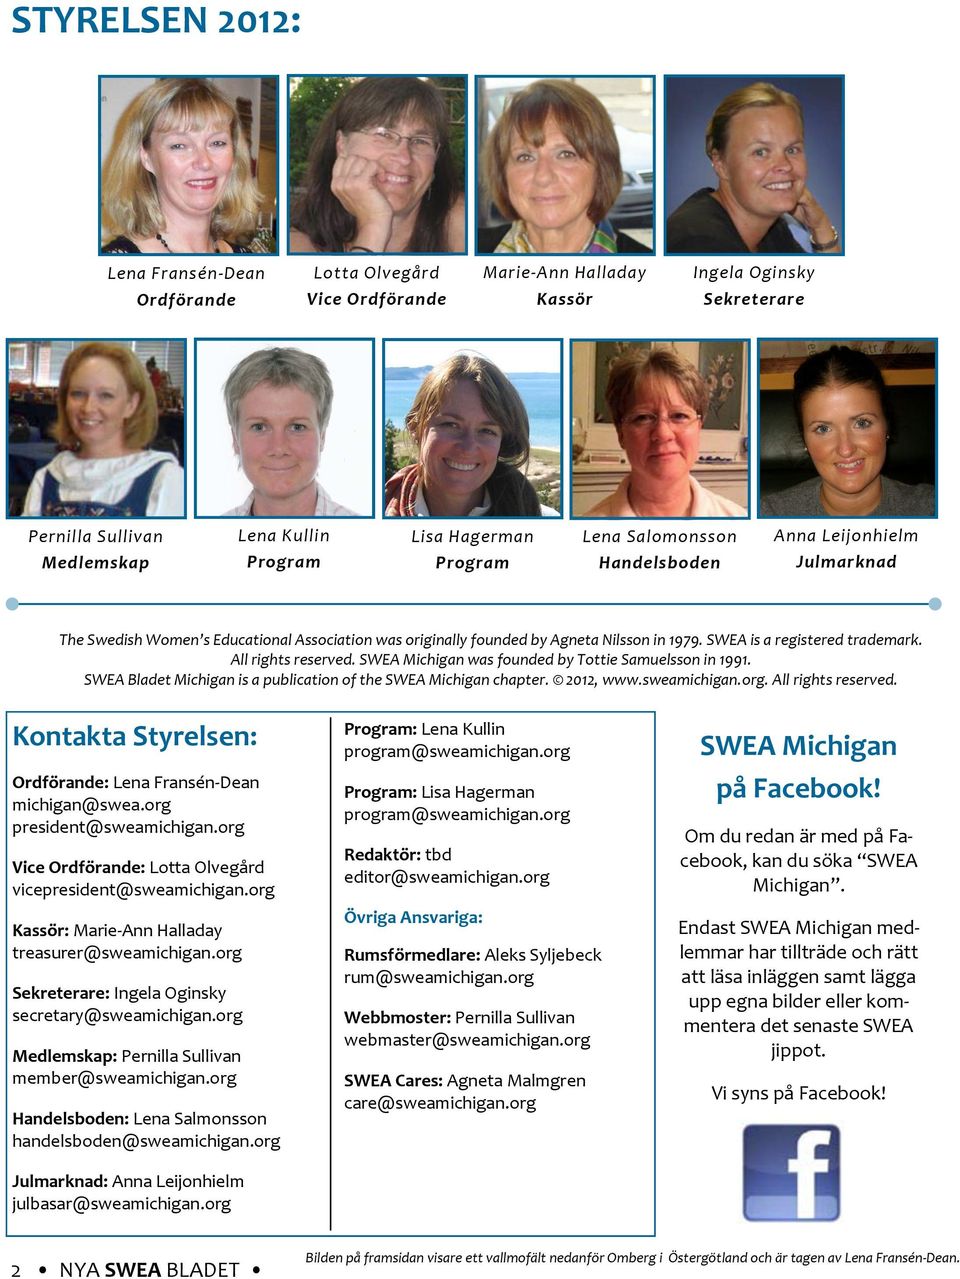 All rights reserved. SWEA Michigan was founded by Tottie Samuelsson in 1991. SWEA Bladet Michigan is a publication of the SWEA Michigan chapter. 2012, www.sweamichigan.org. All rights reserved.